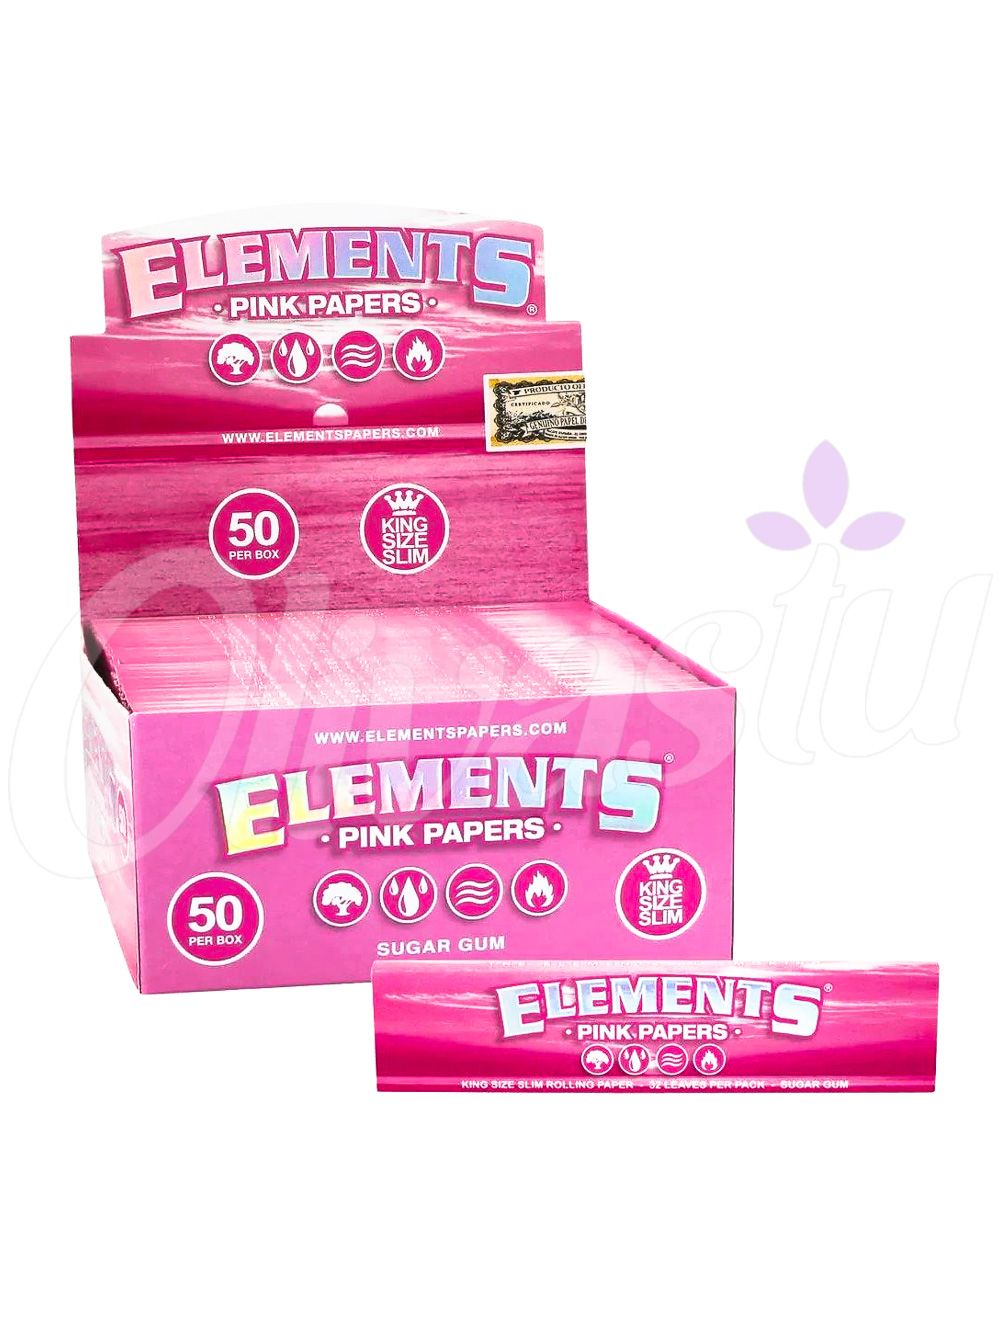  1 box - Elements RED King Size Slim Slow Burn rolling